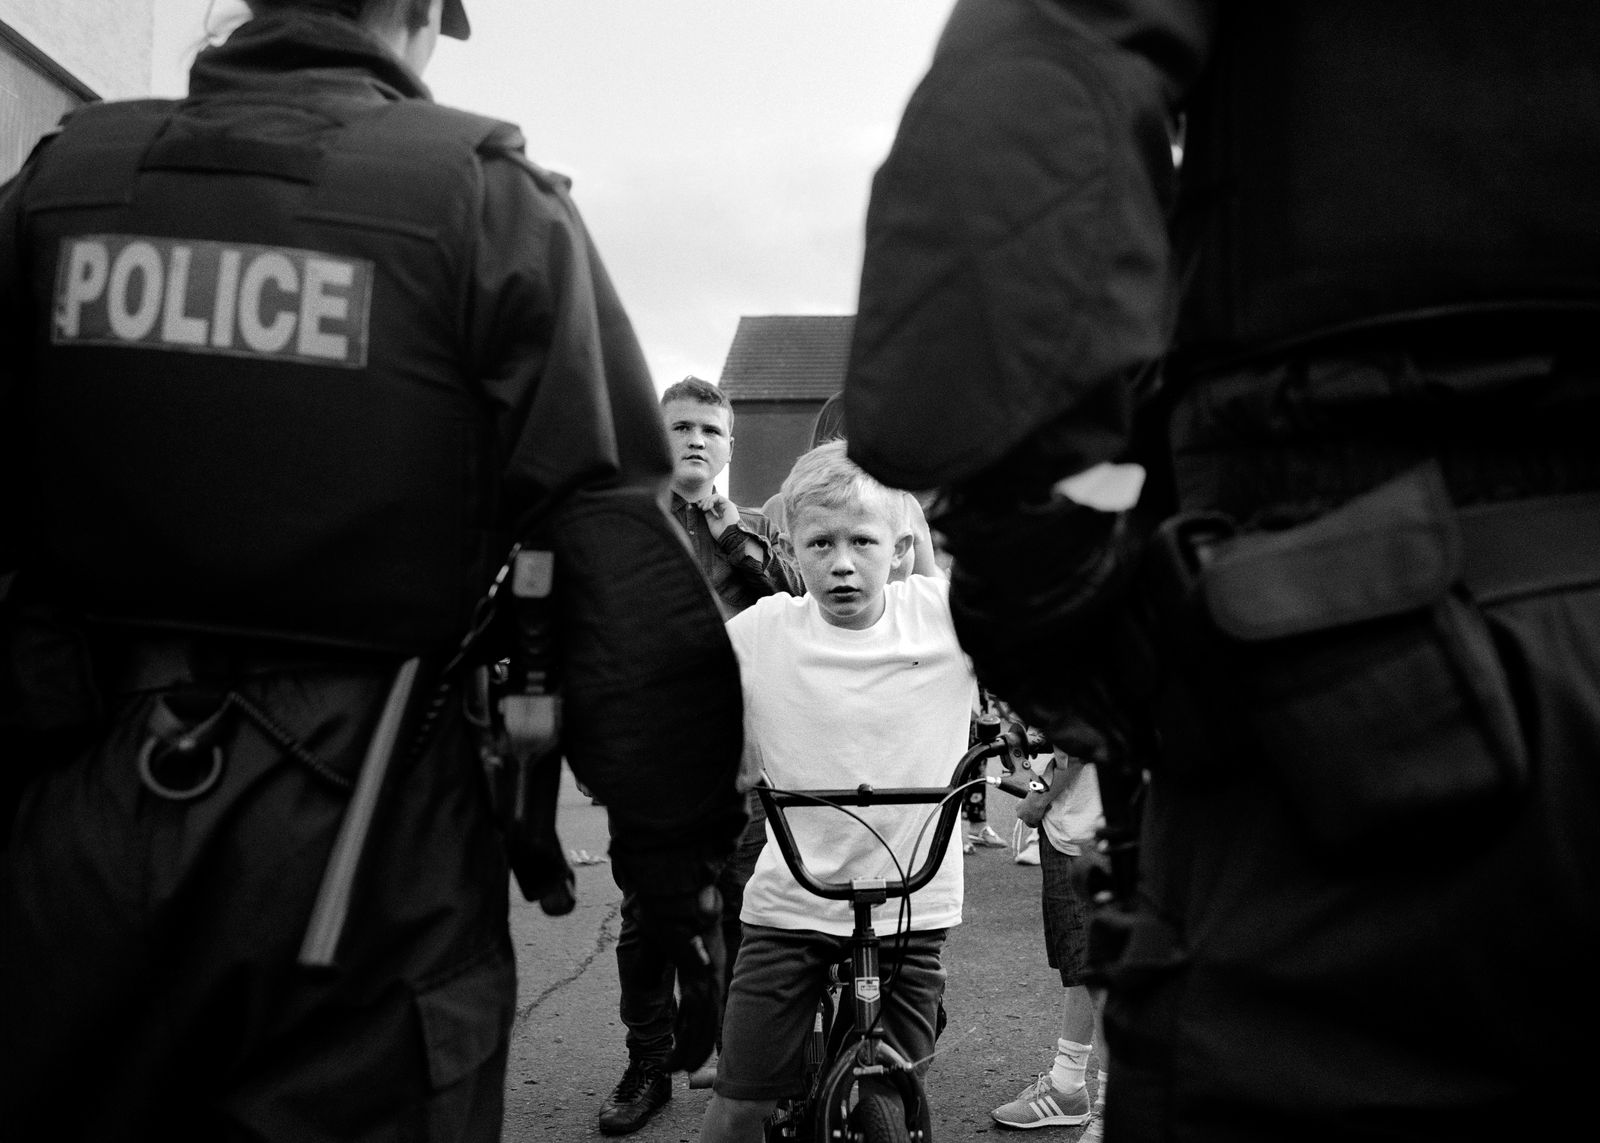 © Toby Binder - Image from the WEE MUCKERS – Youth of Belfast photography project